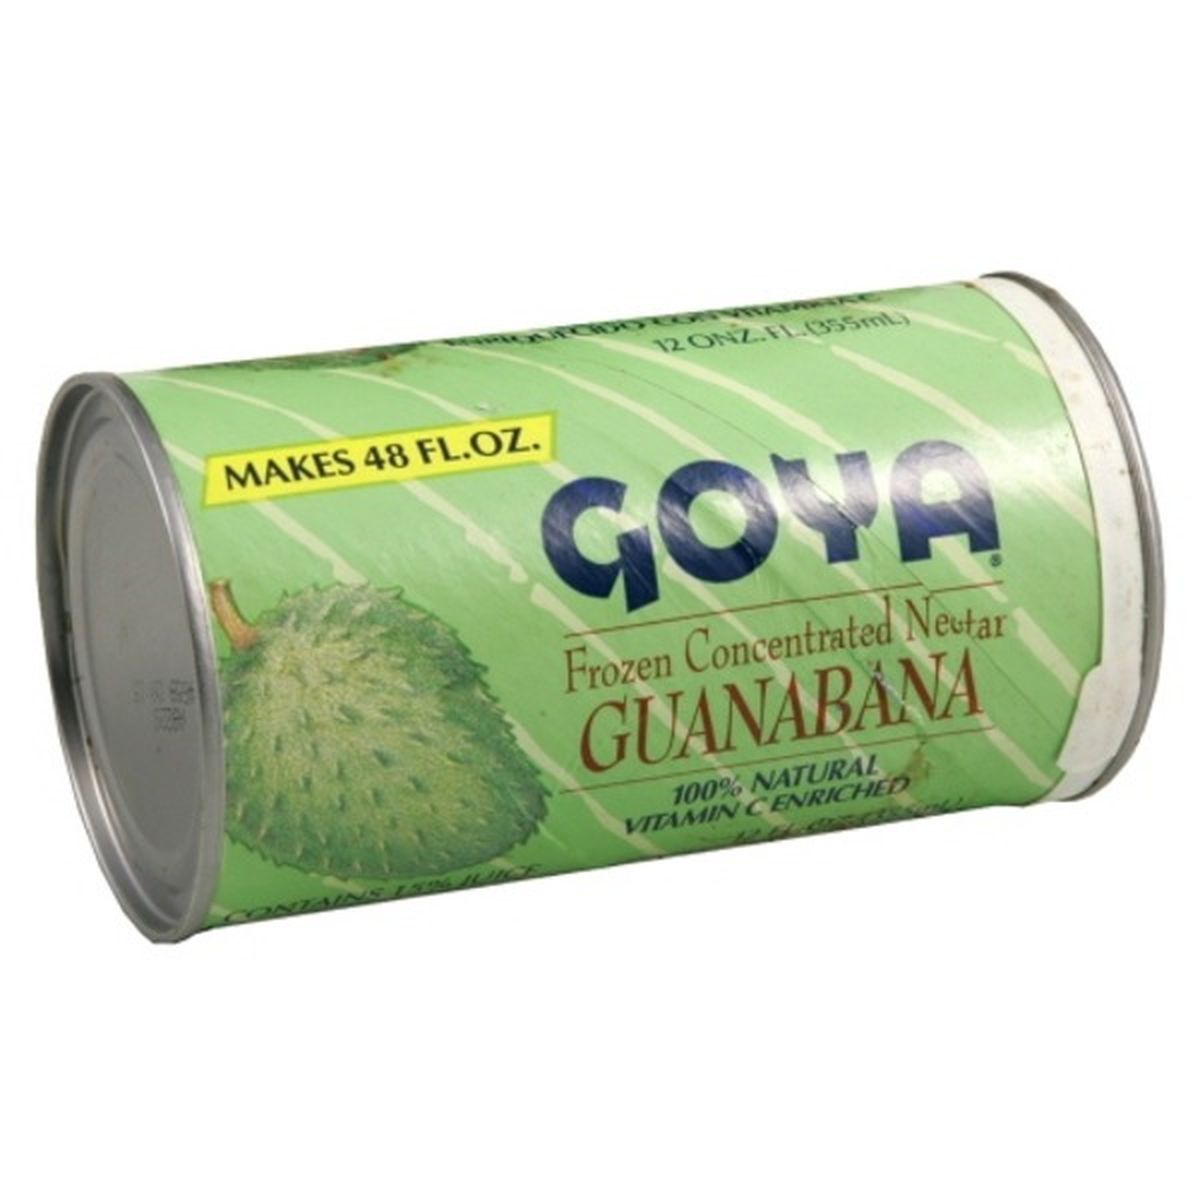 Calories in Goya Frozen Concentrated Nectar, Guanabana